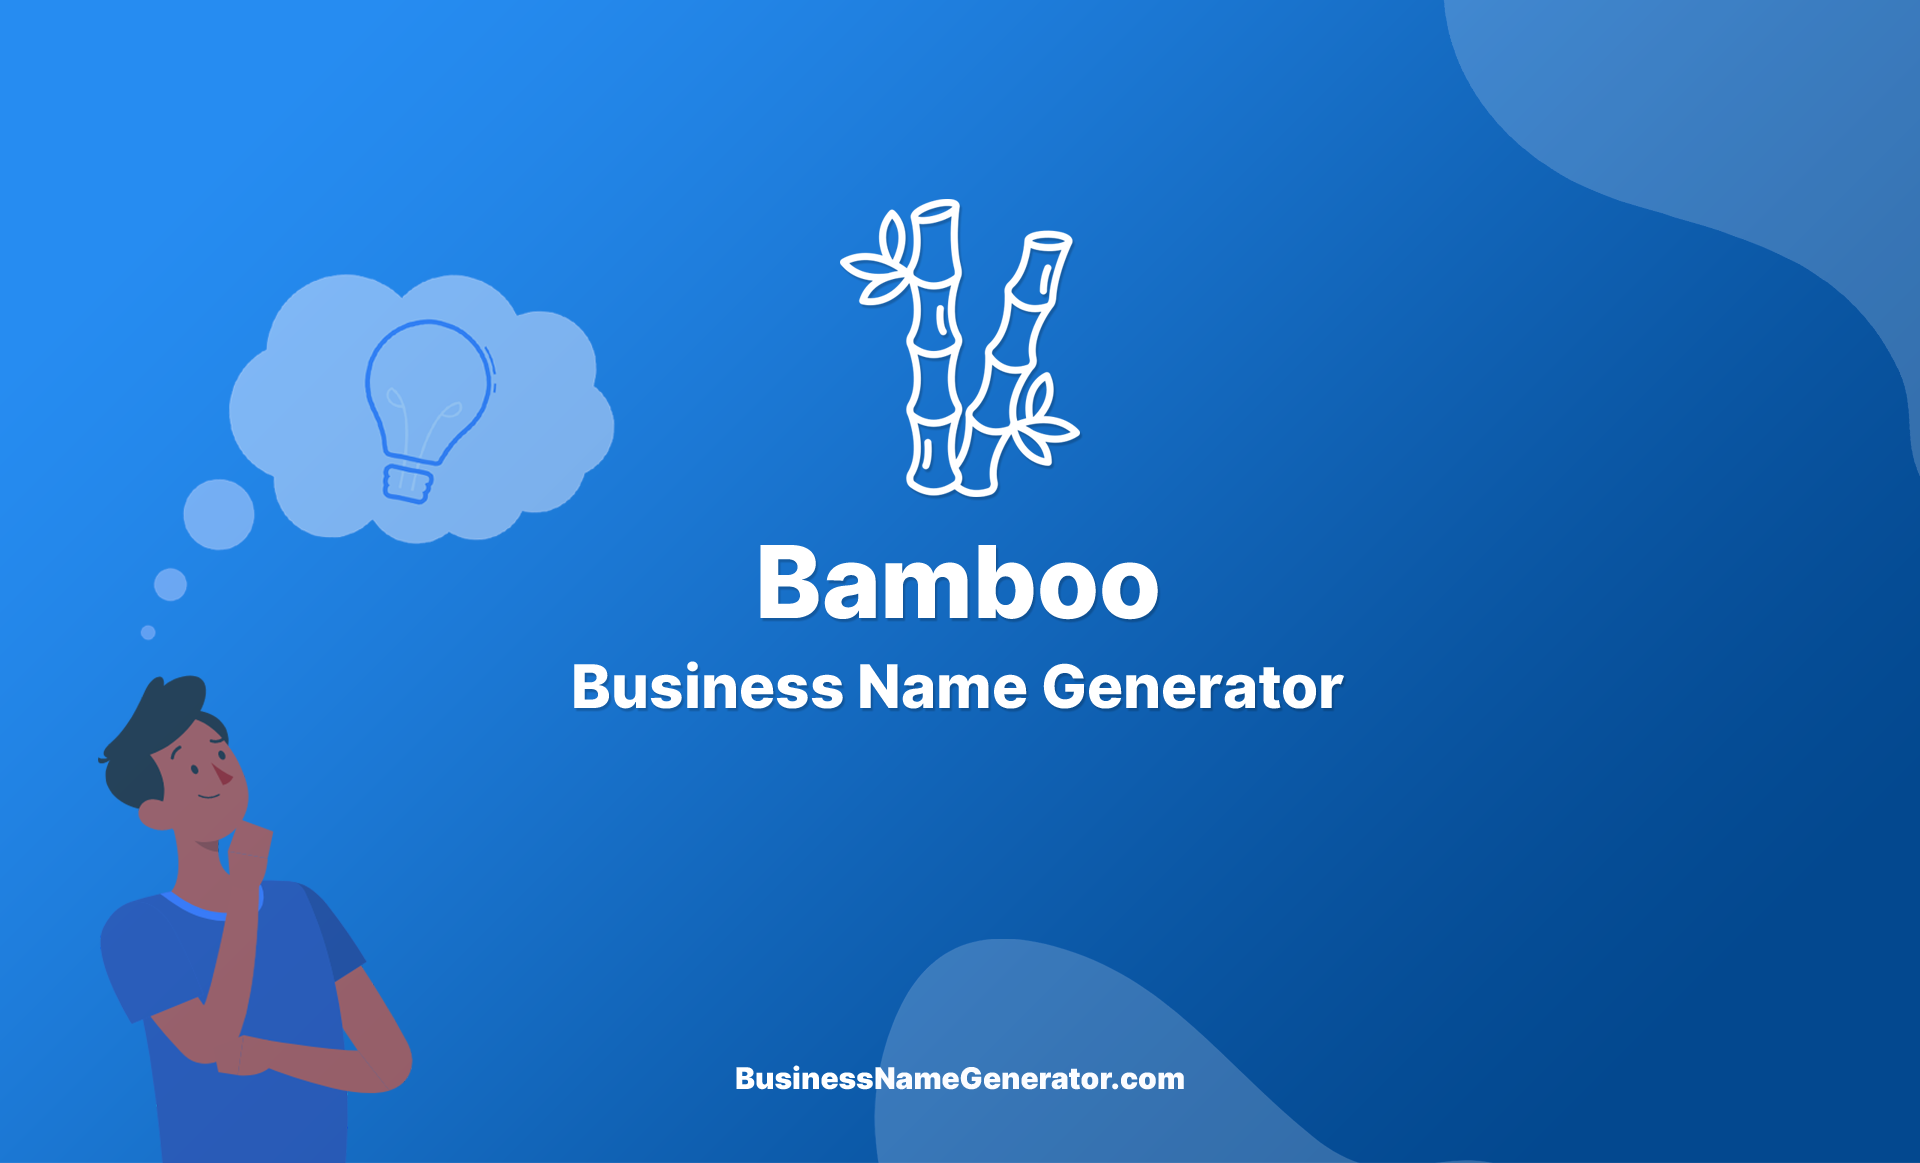 Bamboo Business Name Generator Guide & Ideas